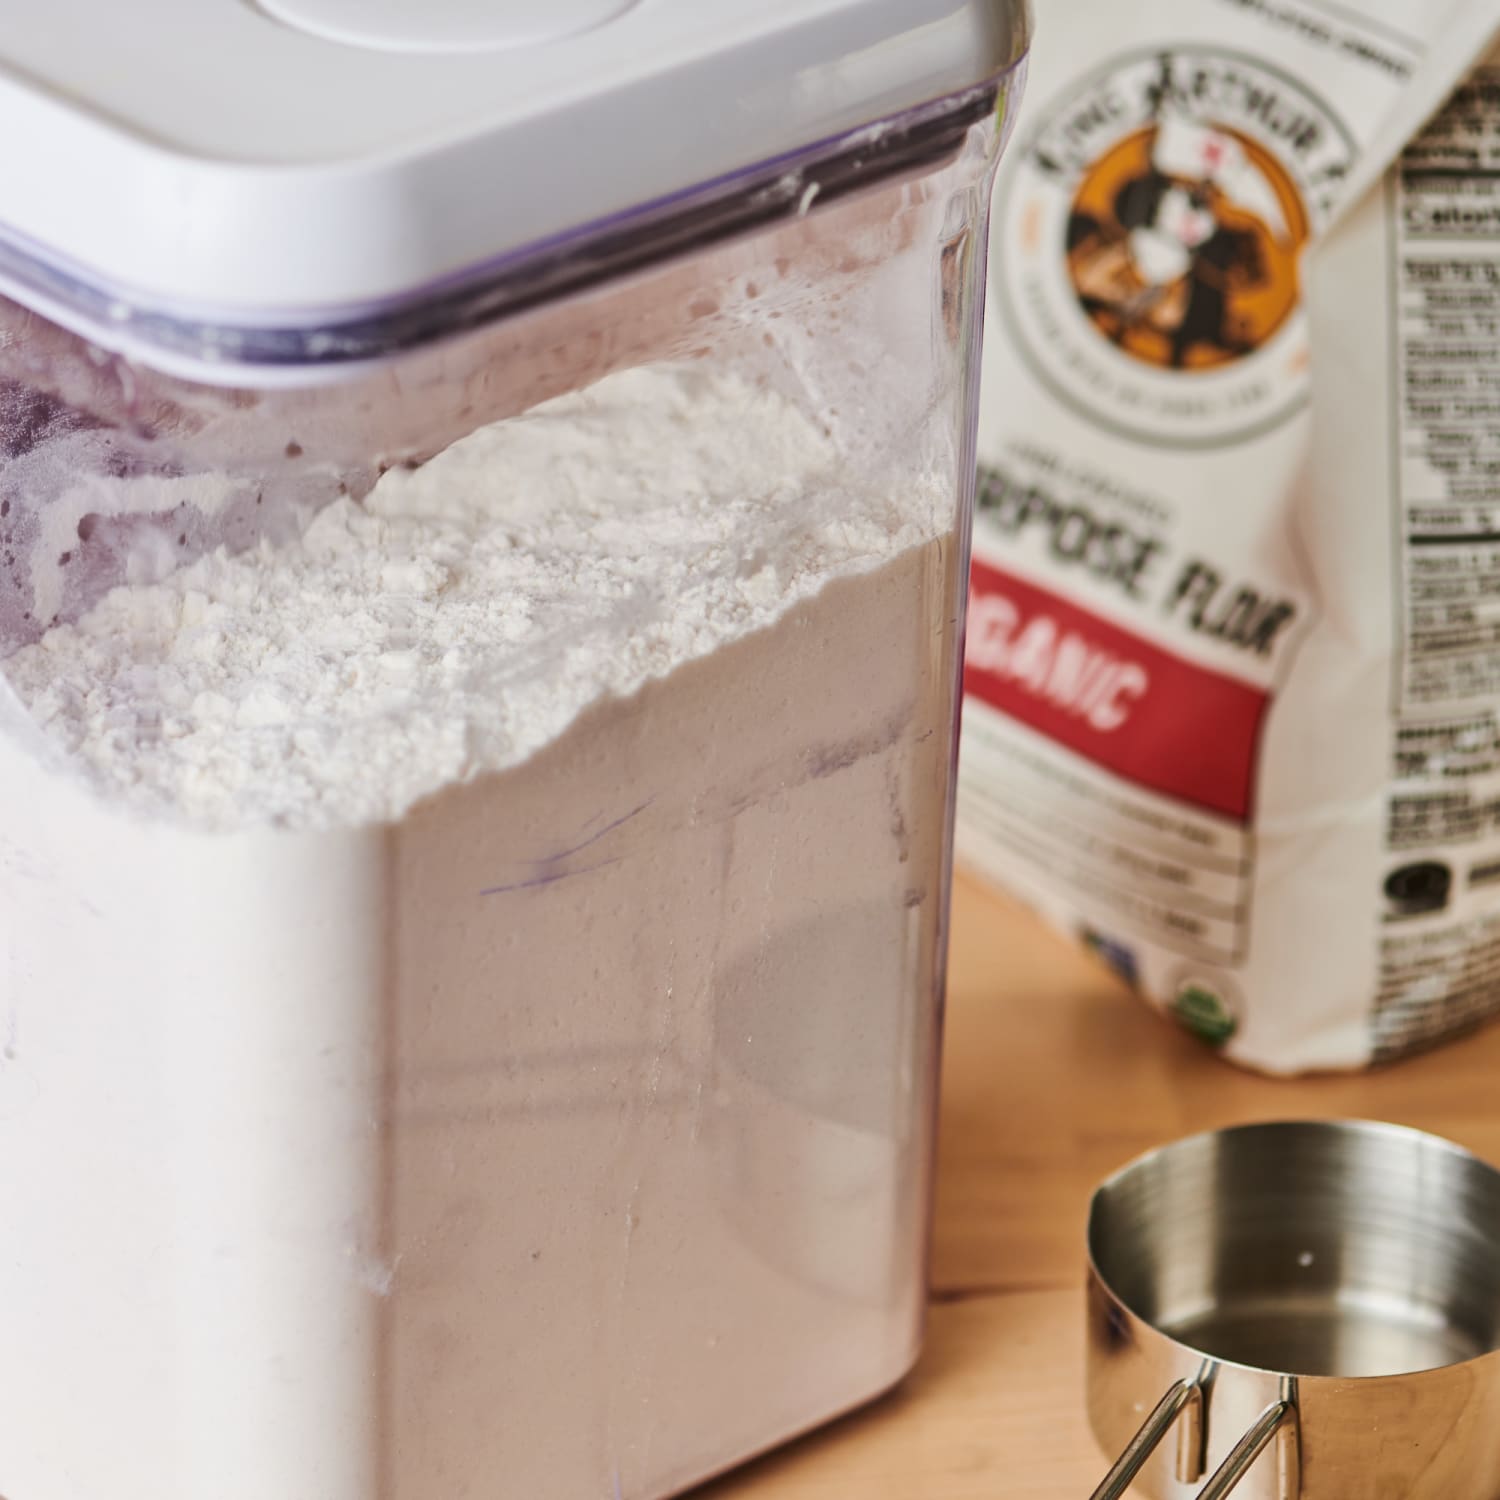 12 Best Substitutes for All-Purpose Flour in Baking